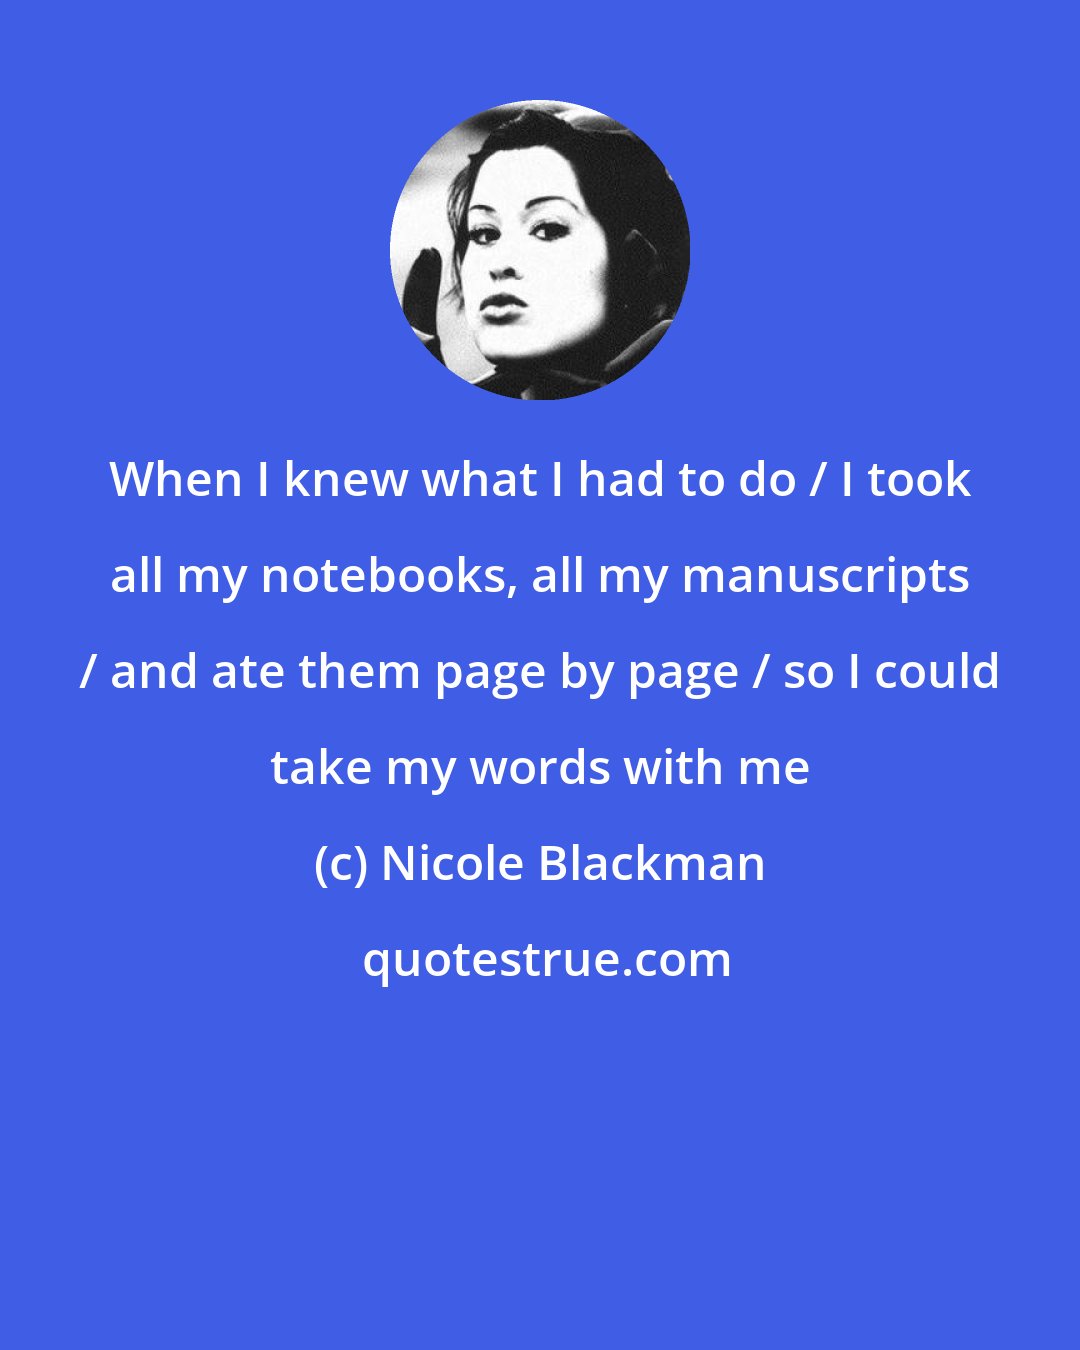 Nicole Blackman: When I knew what I had to do / I took all my notebooks, all my manuscripts / and ate them page by page / so I could take my words with me